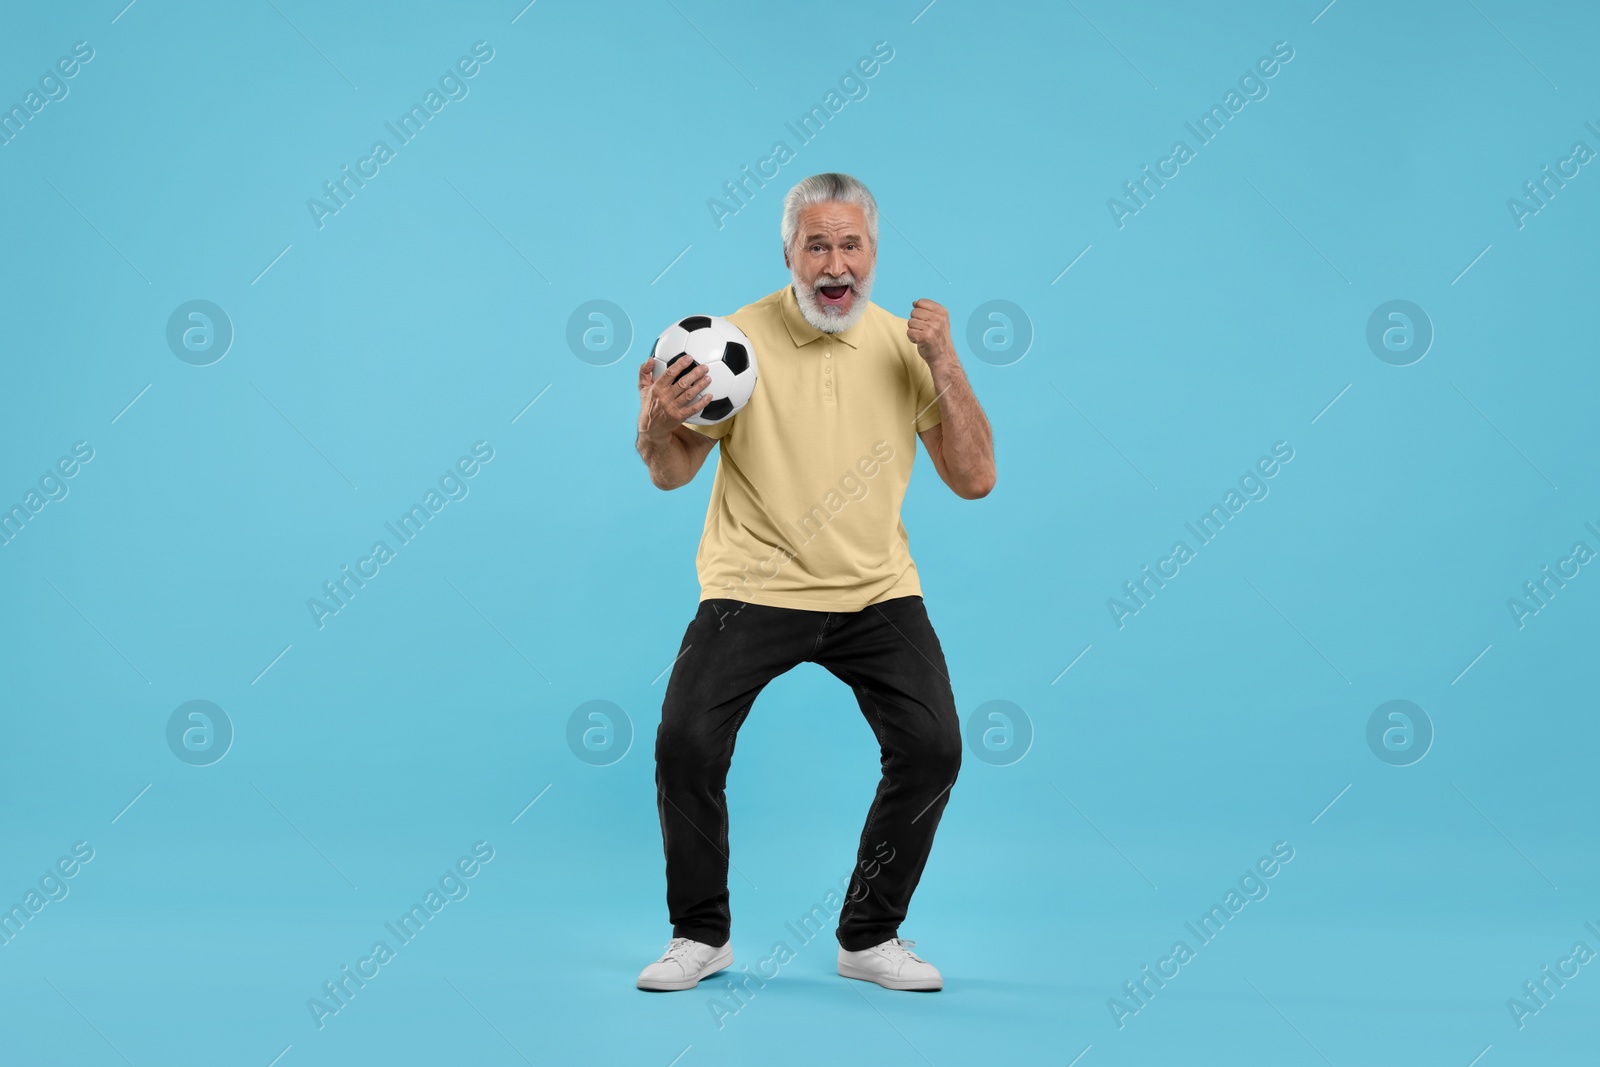 Photo of Happy senior sports fan with soccer ball on light blue background